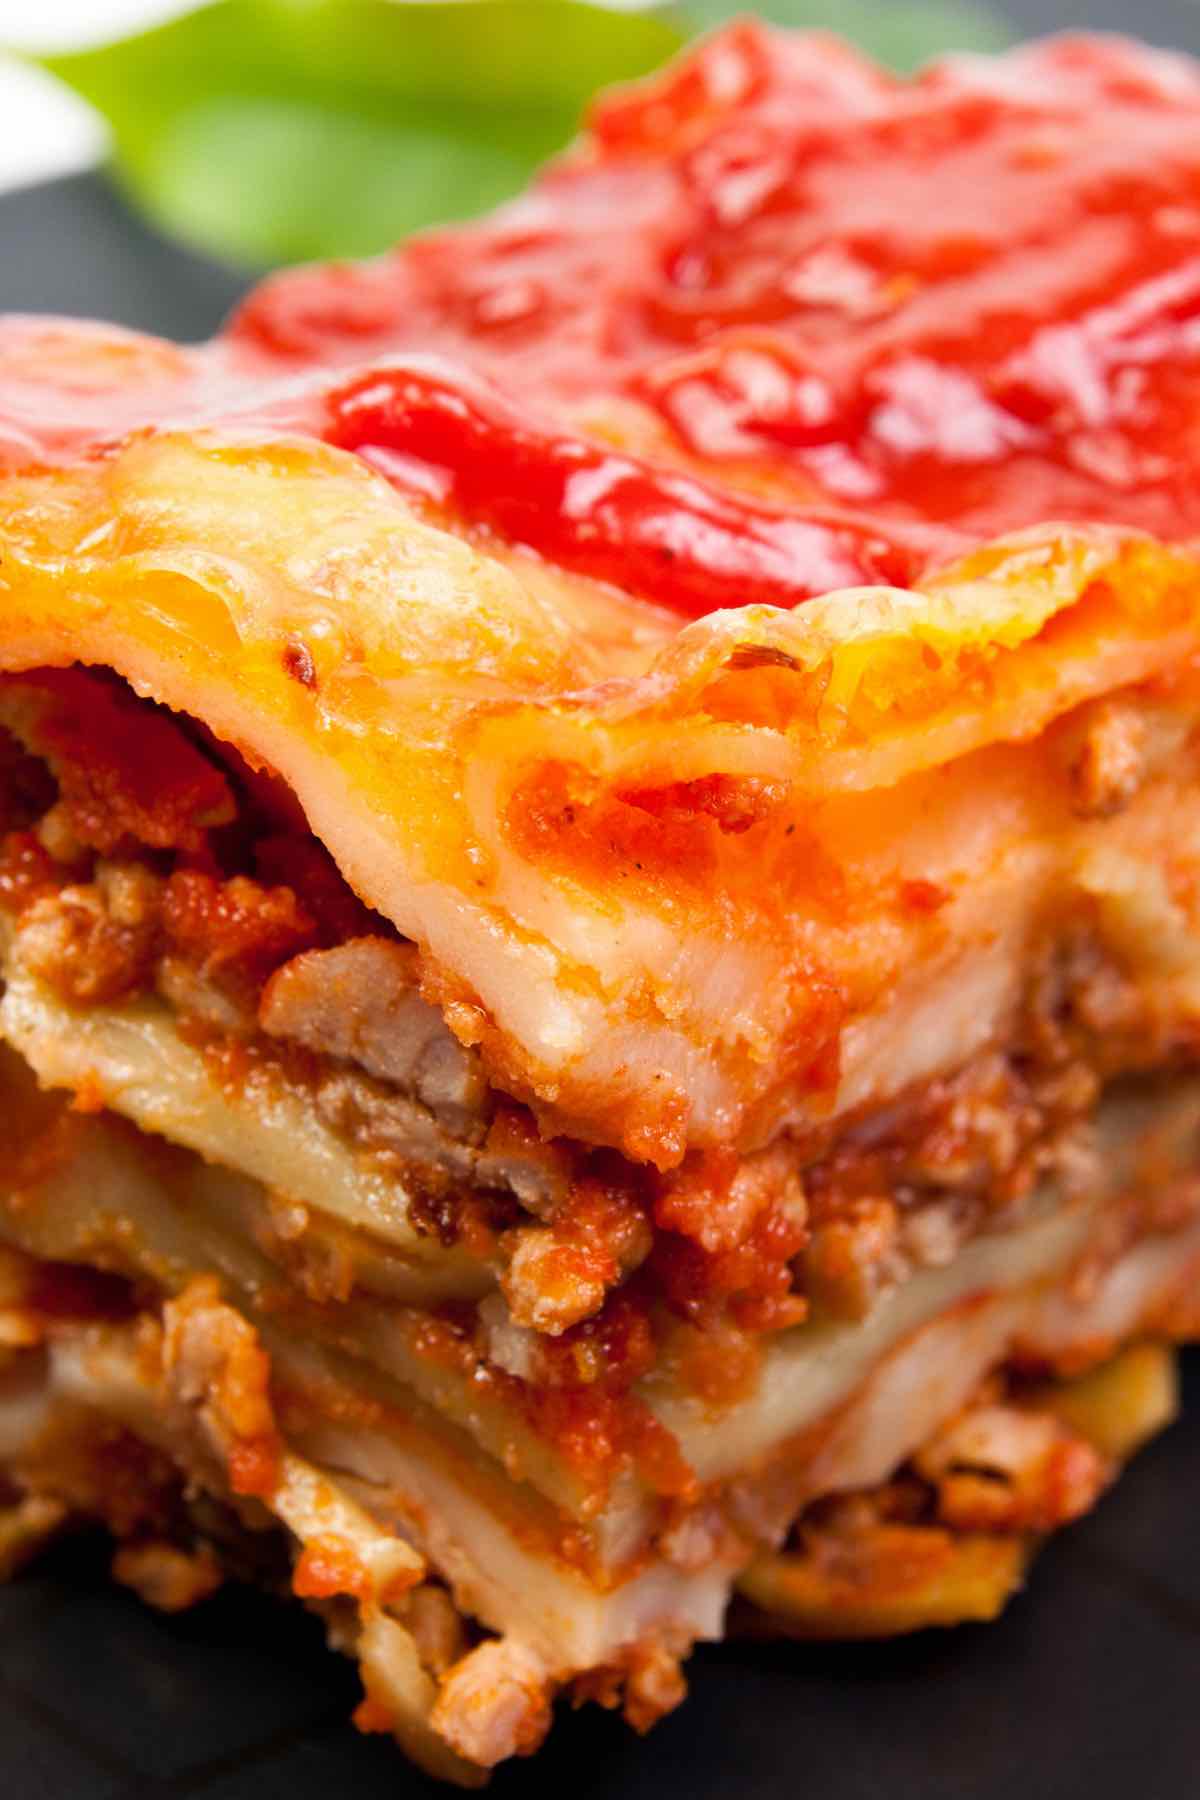 Knowing how to Reheat Lasagna in the Oven is a key skill so that the leftover lasagna tastes just as good as the day it first came out. If you simply microwave it until it’s heated through, you may risk having mushy, unappetizing lasagna.